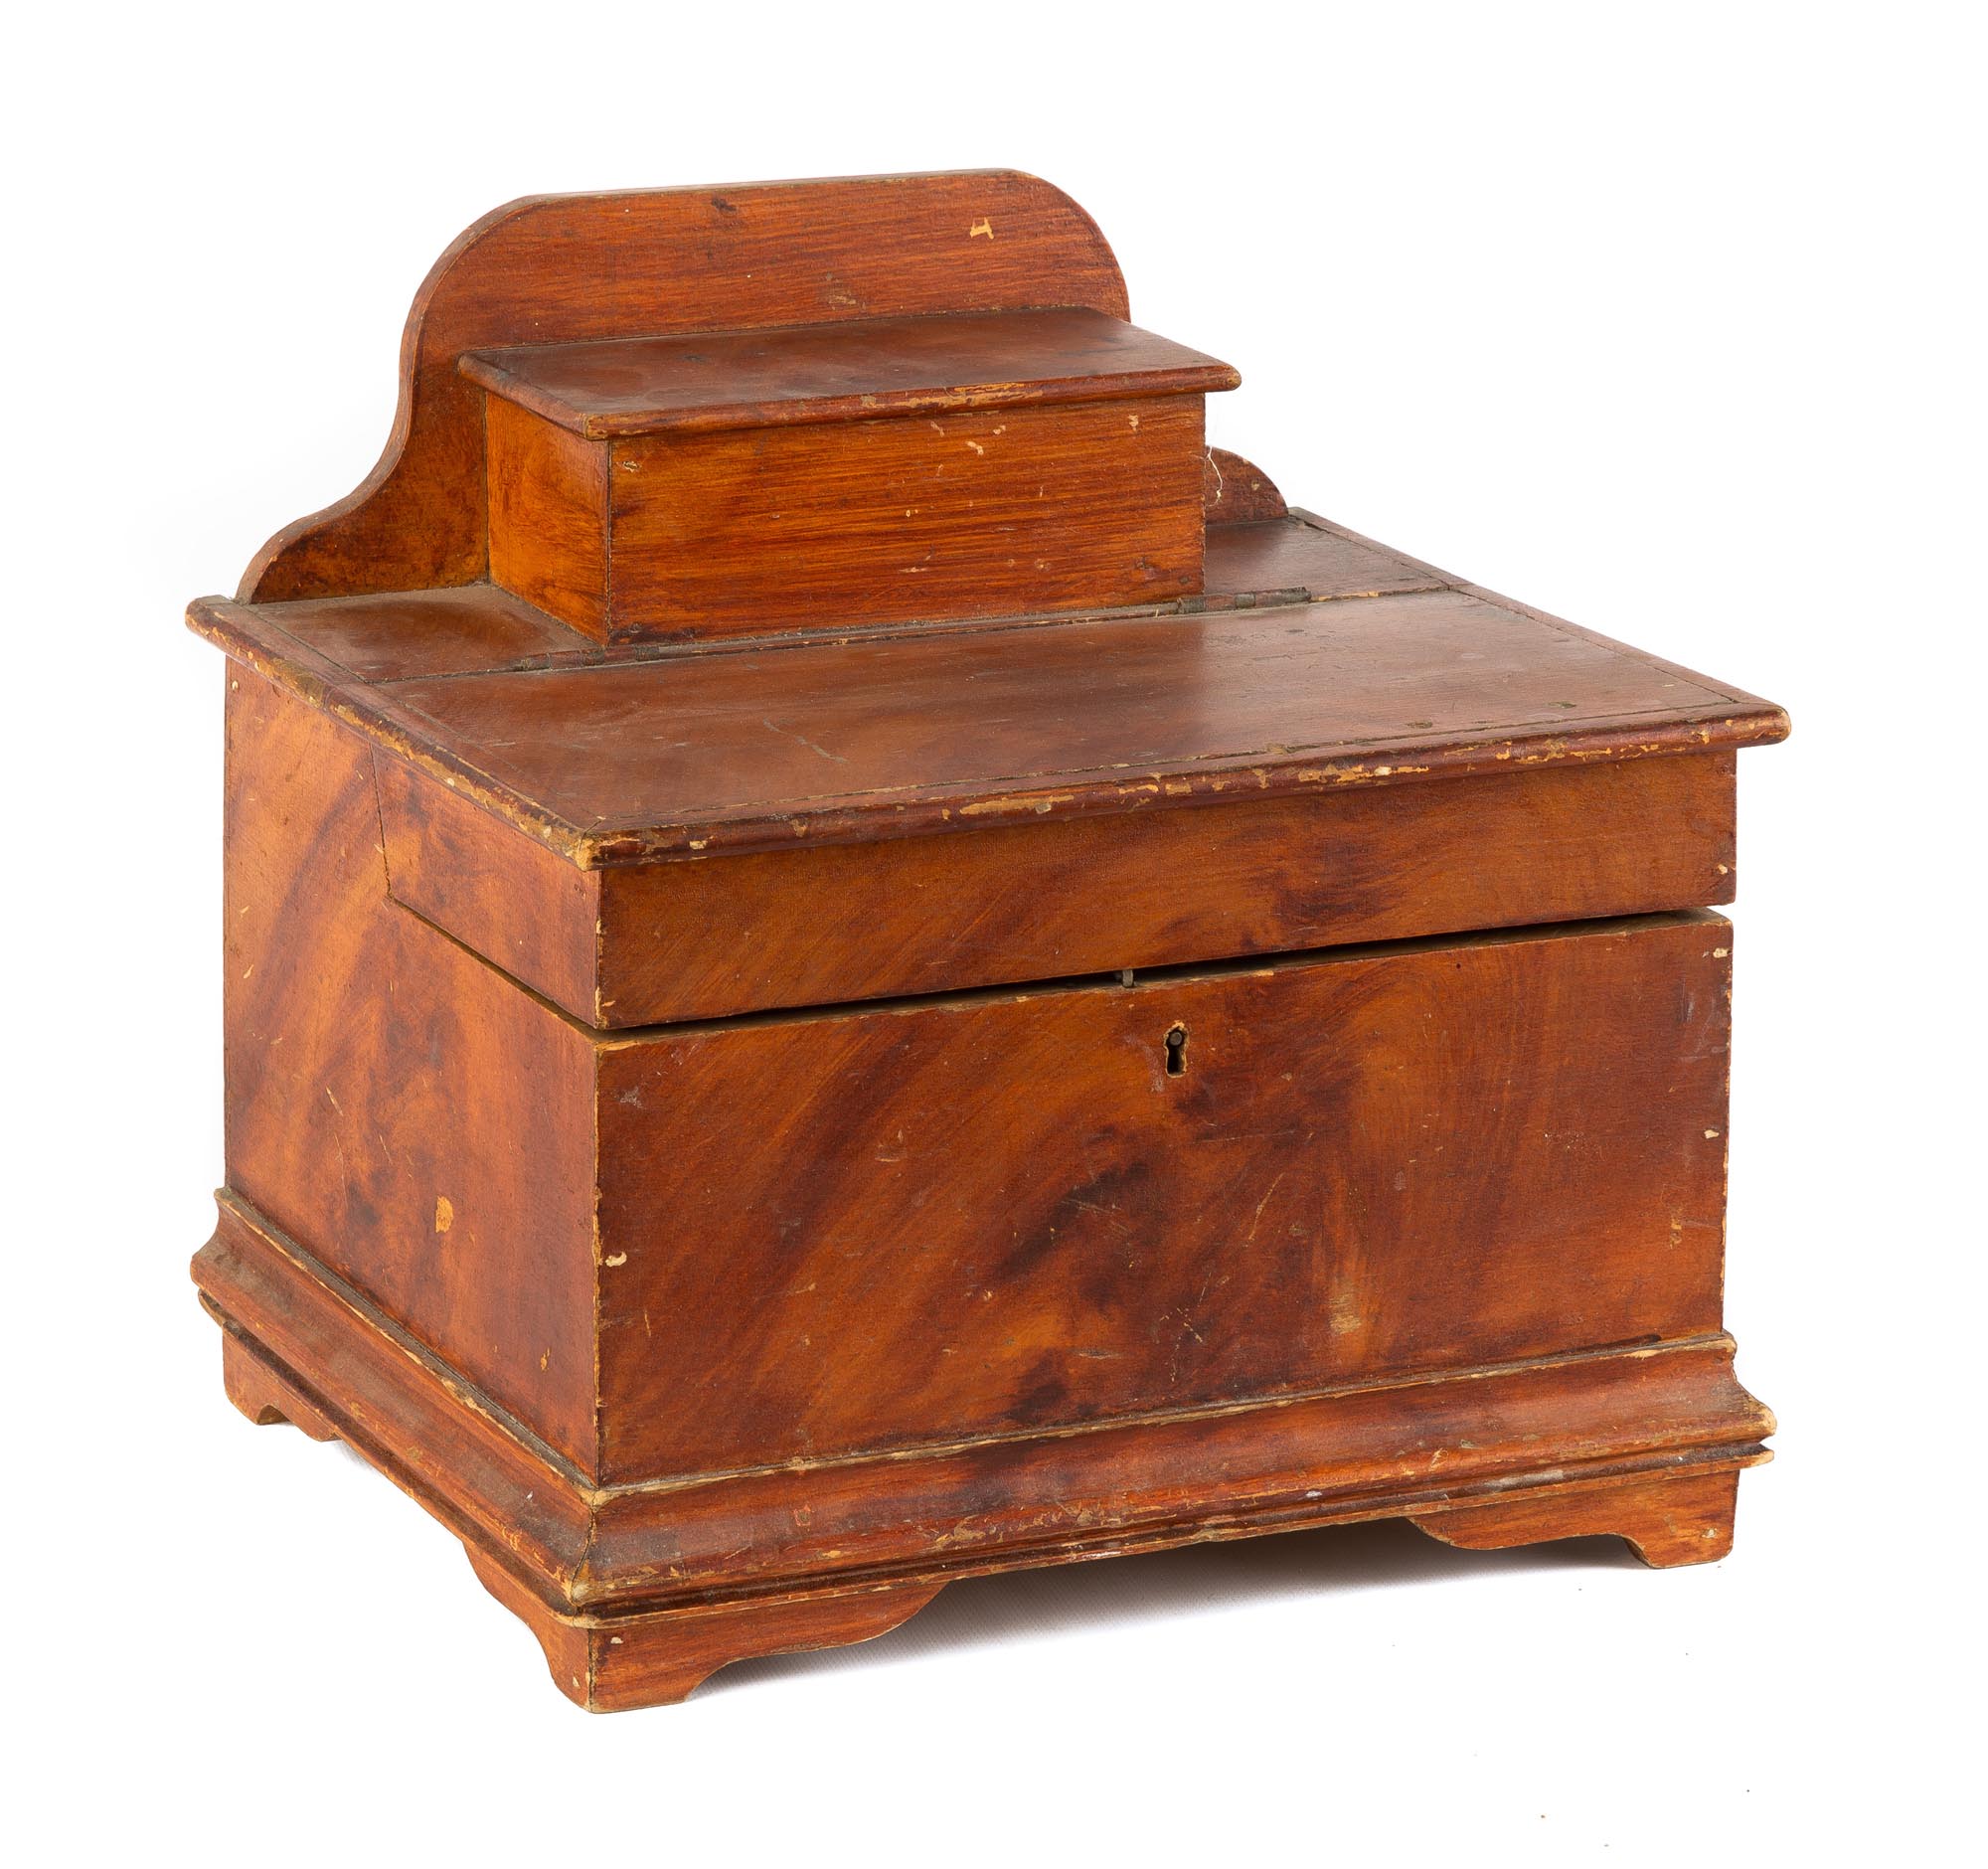 American Painted Pine Document Box. Early 19th century. Ht. 12" W 11 1/2" D 9 1/2". Online bidding